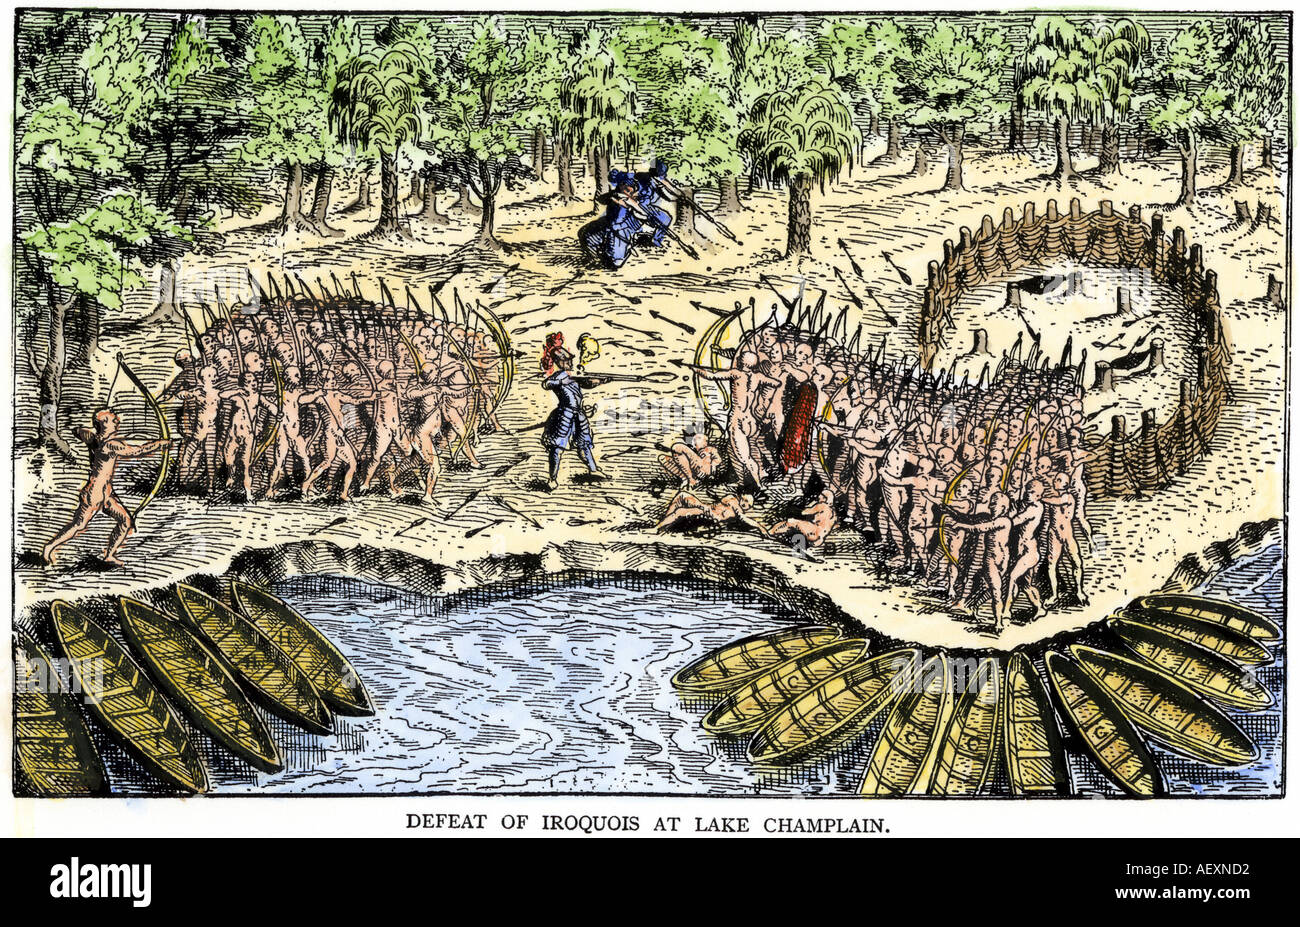 Samuel de Champlain defeats the Iroquois at Lake Champlain opening the settlement of New France 1600s. Hand-colored woodcut Stock Photo